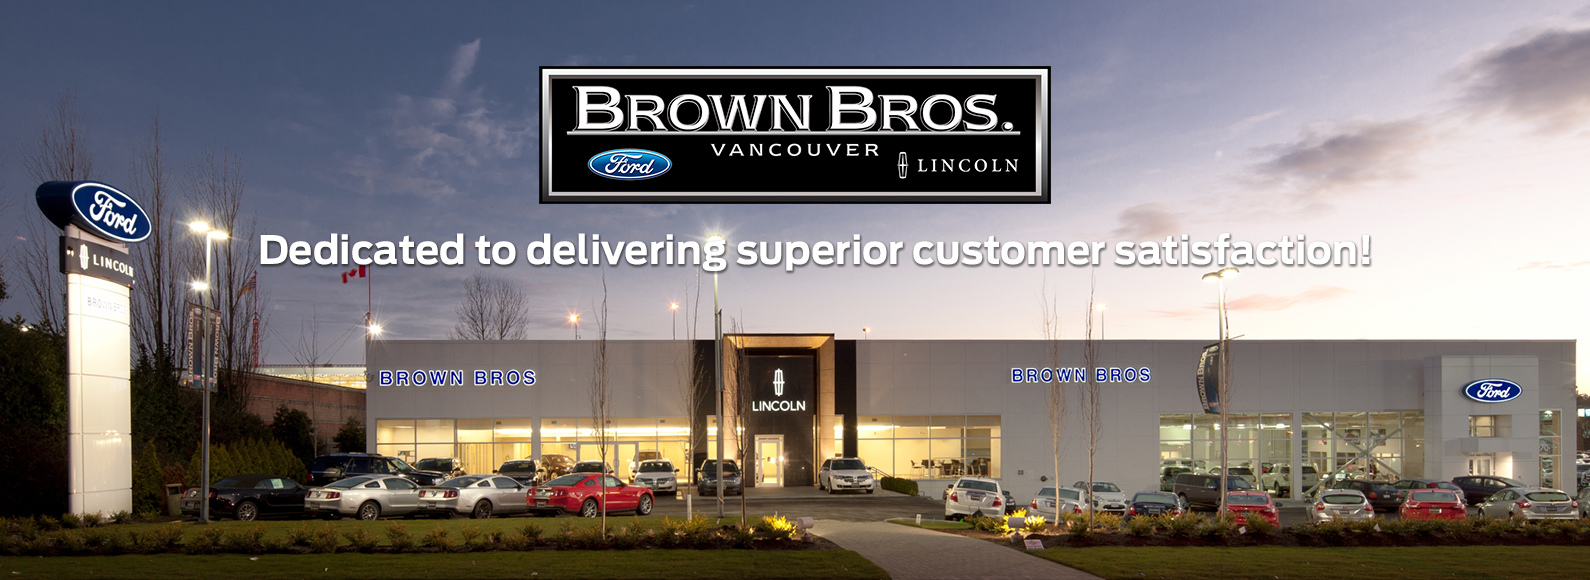 Brown bros ford in vancouver